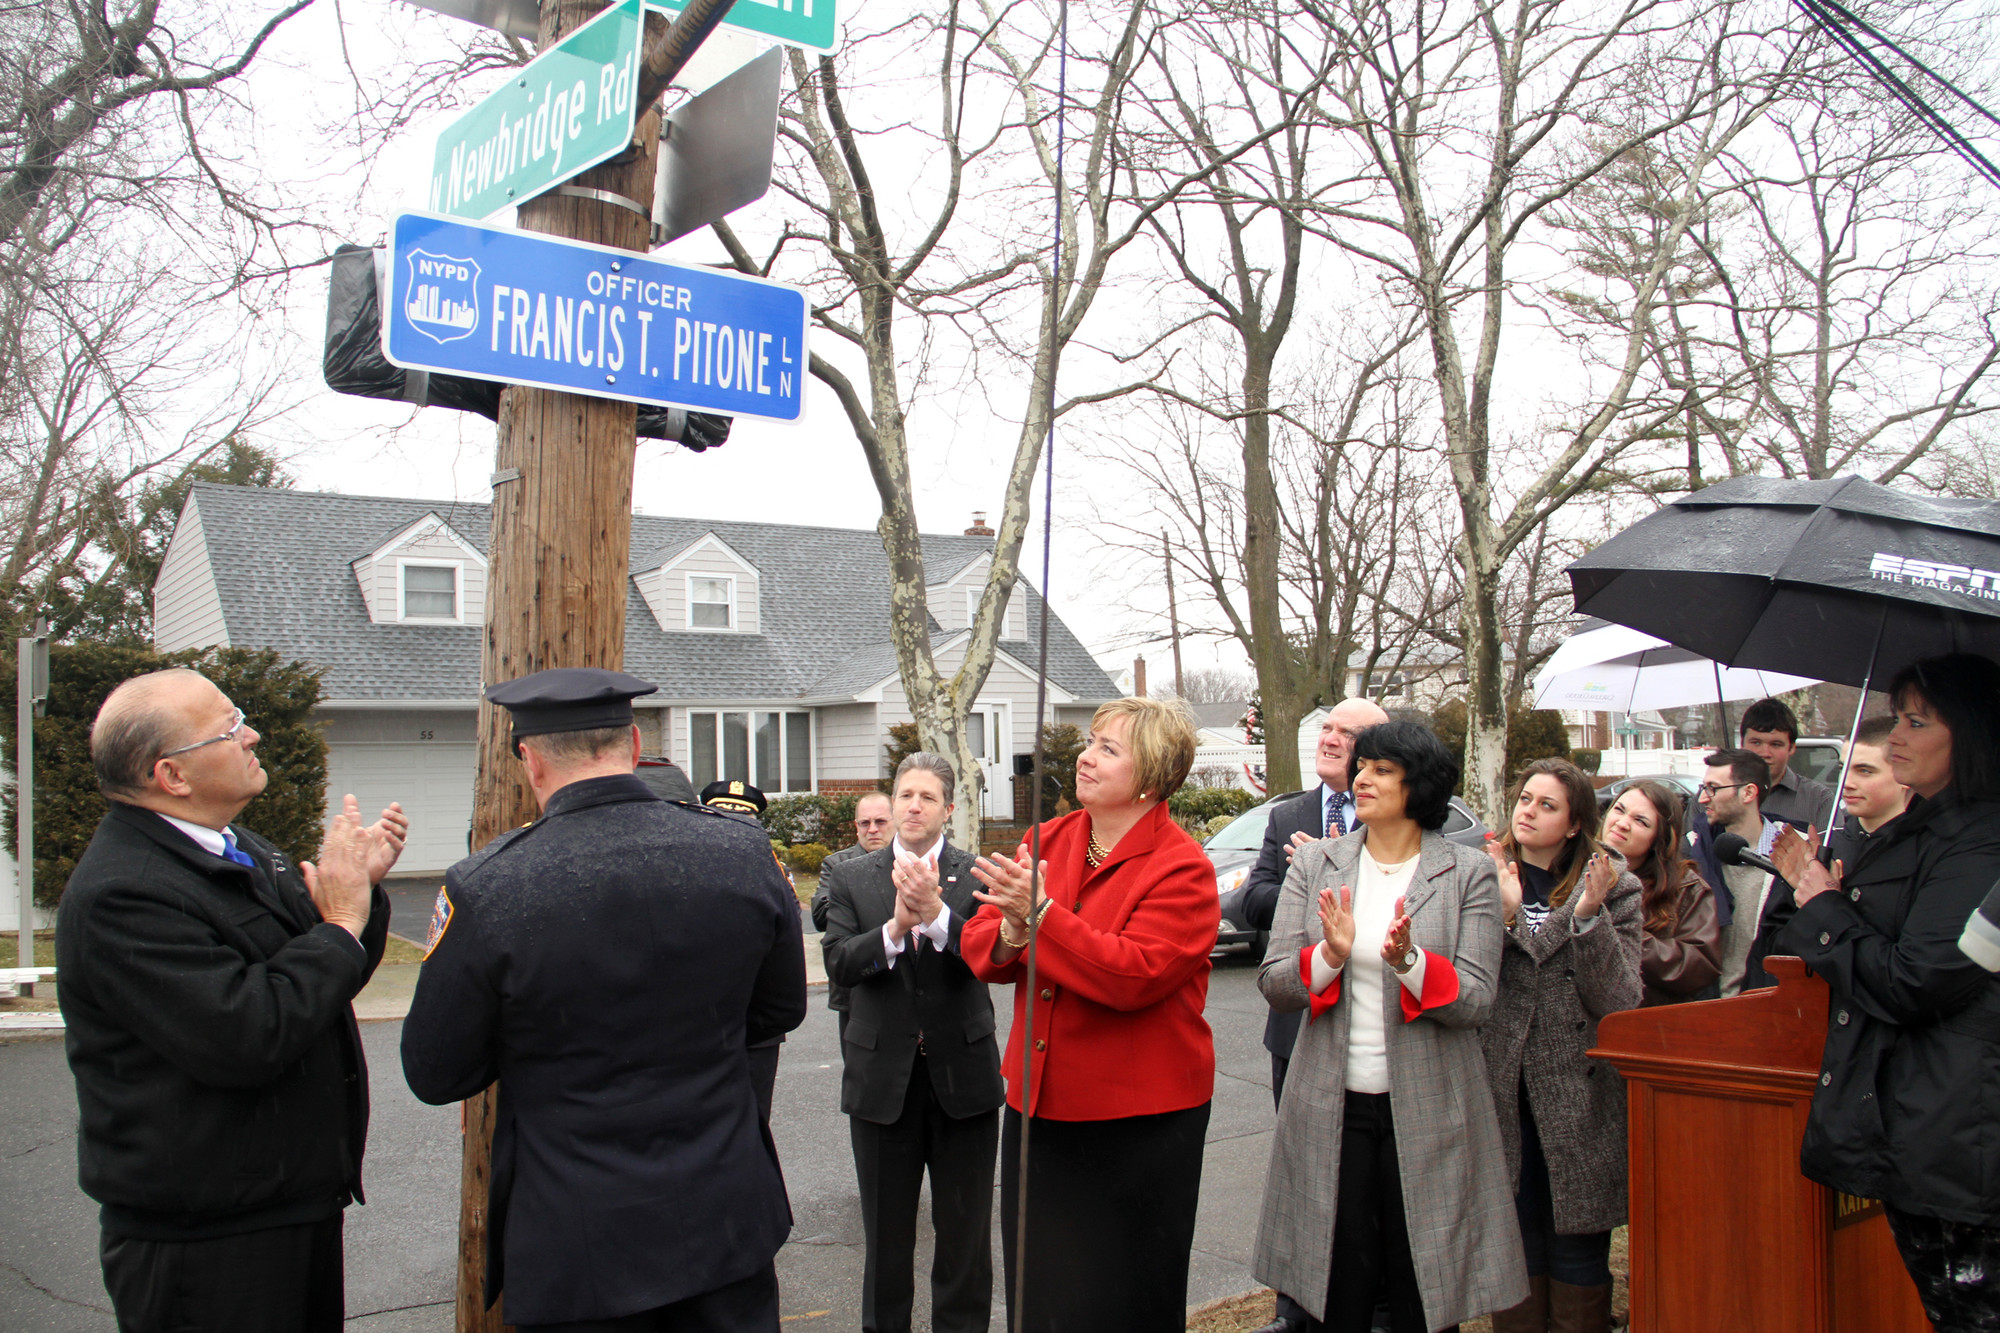 The unveiling of a street sign dedicated to Officer Francis T. Pitone, an NYPD officer and Sept. 11 first responder who died last August, was met with applause.